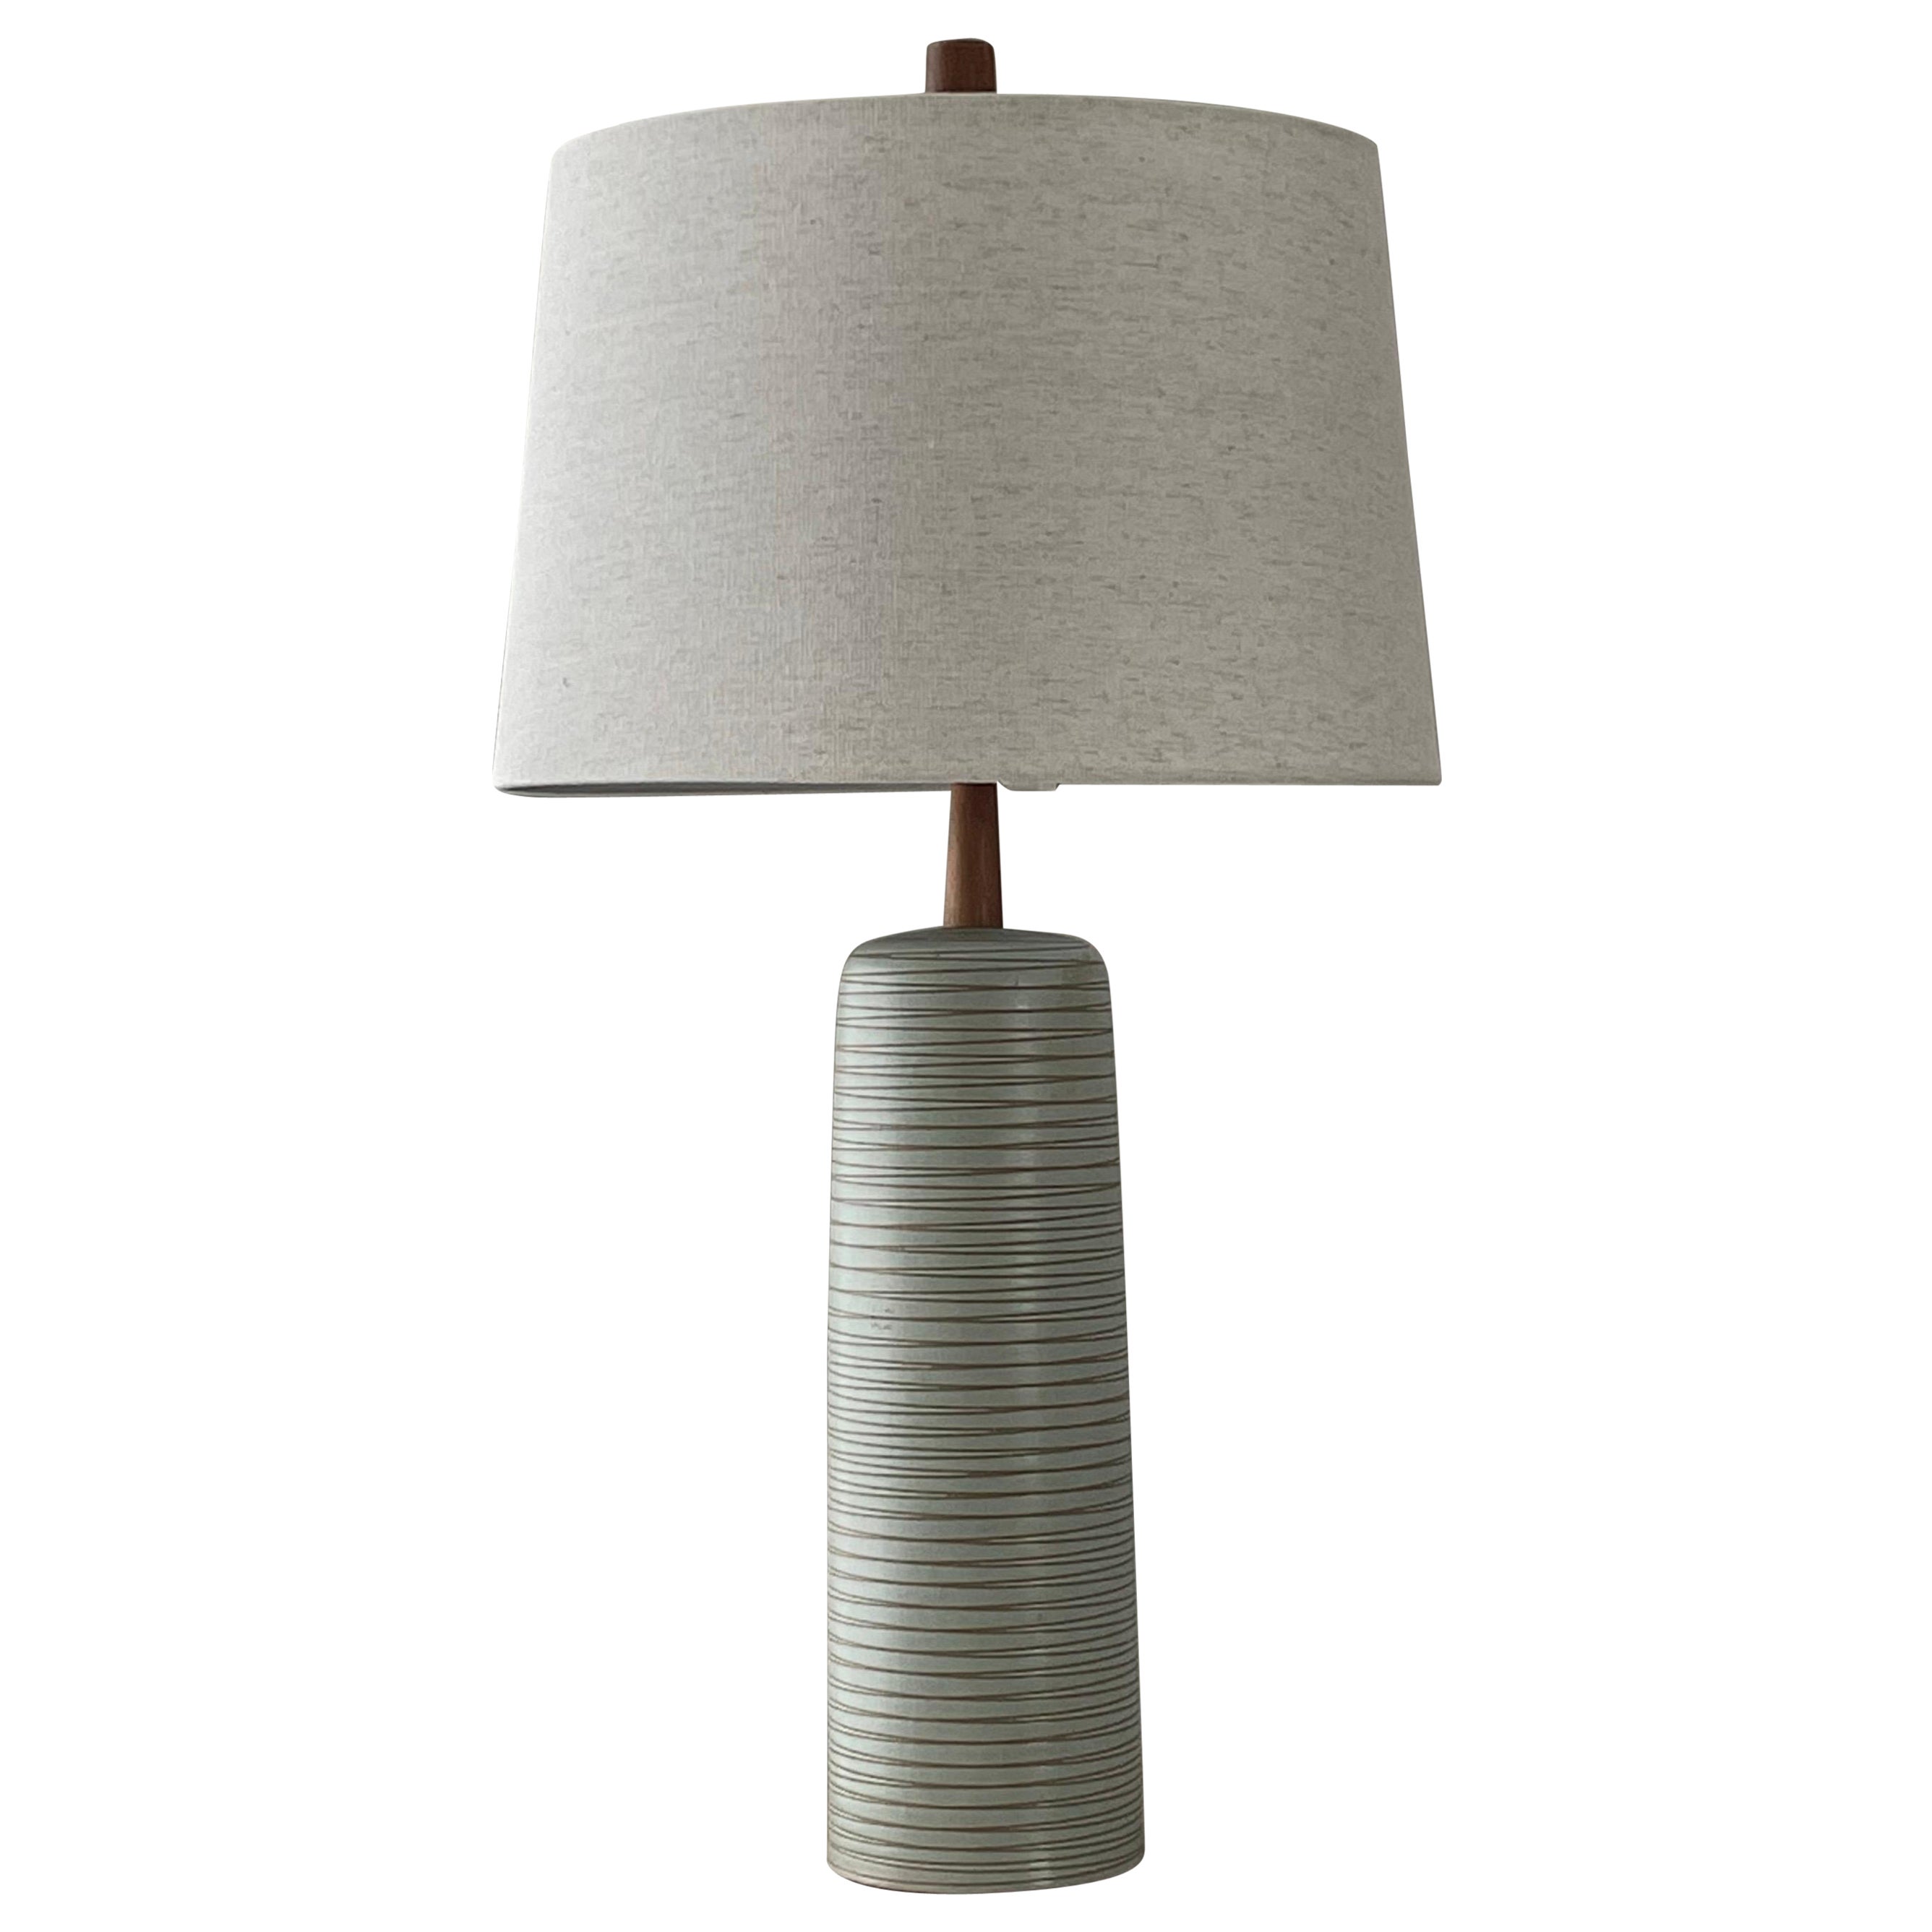 Jane and Gordon Martz Tall Ceramic Table Lamp For Sale